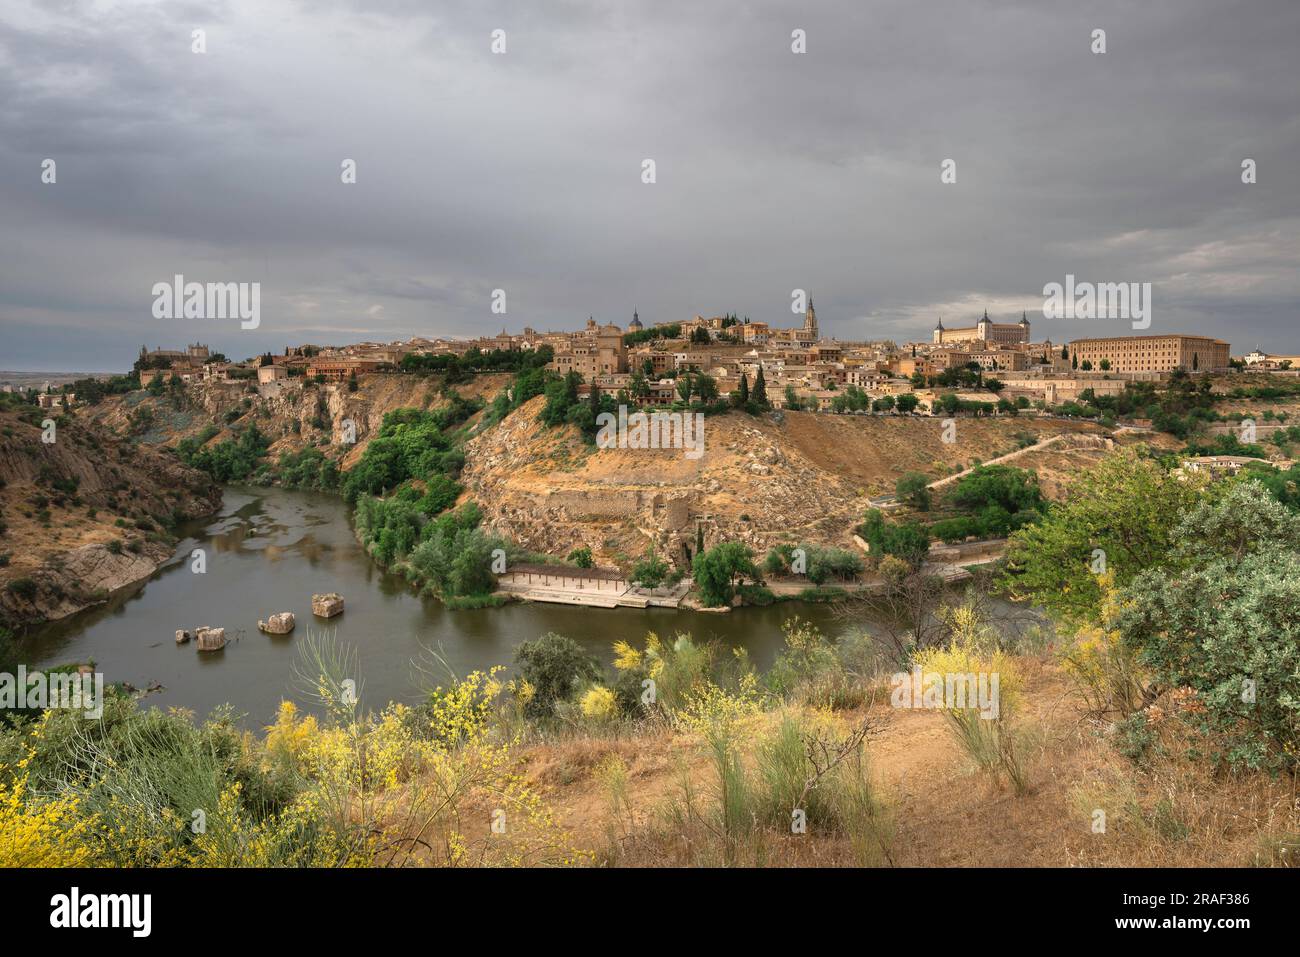 Toledo Spain, view in dramatic light of the historic city of Toledo famously sited on a hill above a bend in the Tagus River, Central Spain Stock Photo